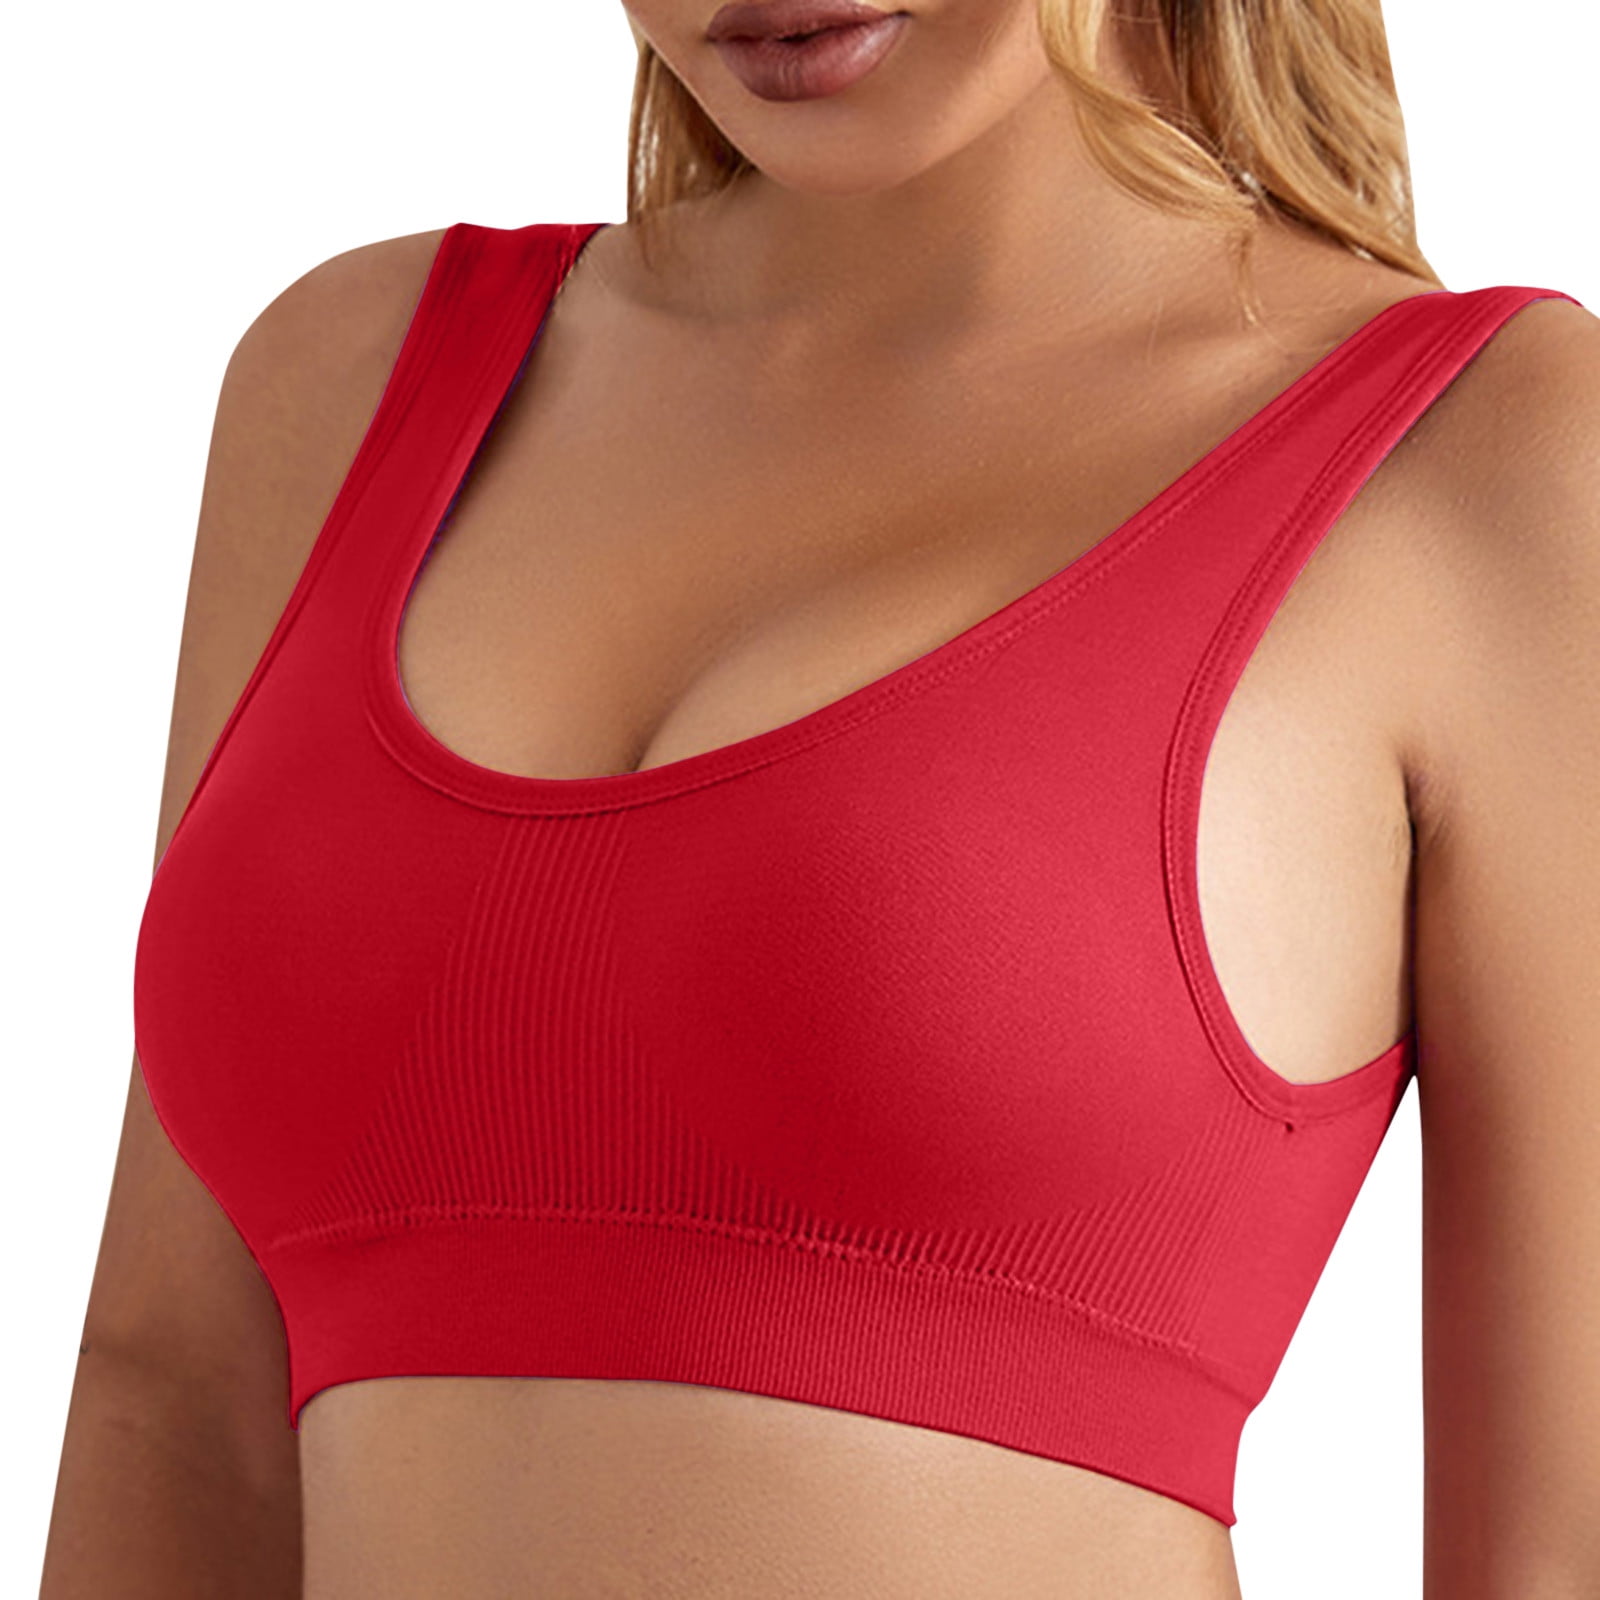 CAICJ98 Lingerie for Women Sports Bras for Women High Impact Moisture  Wicking Racerback Sports Bra Molded Cup for Running Plus Size Red,XL 